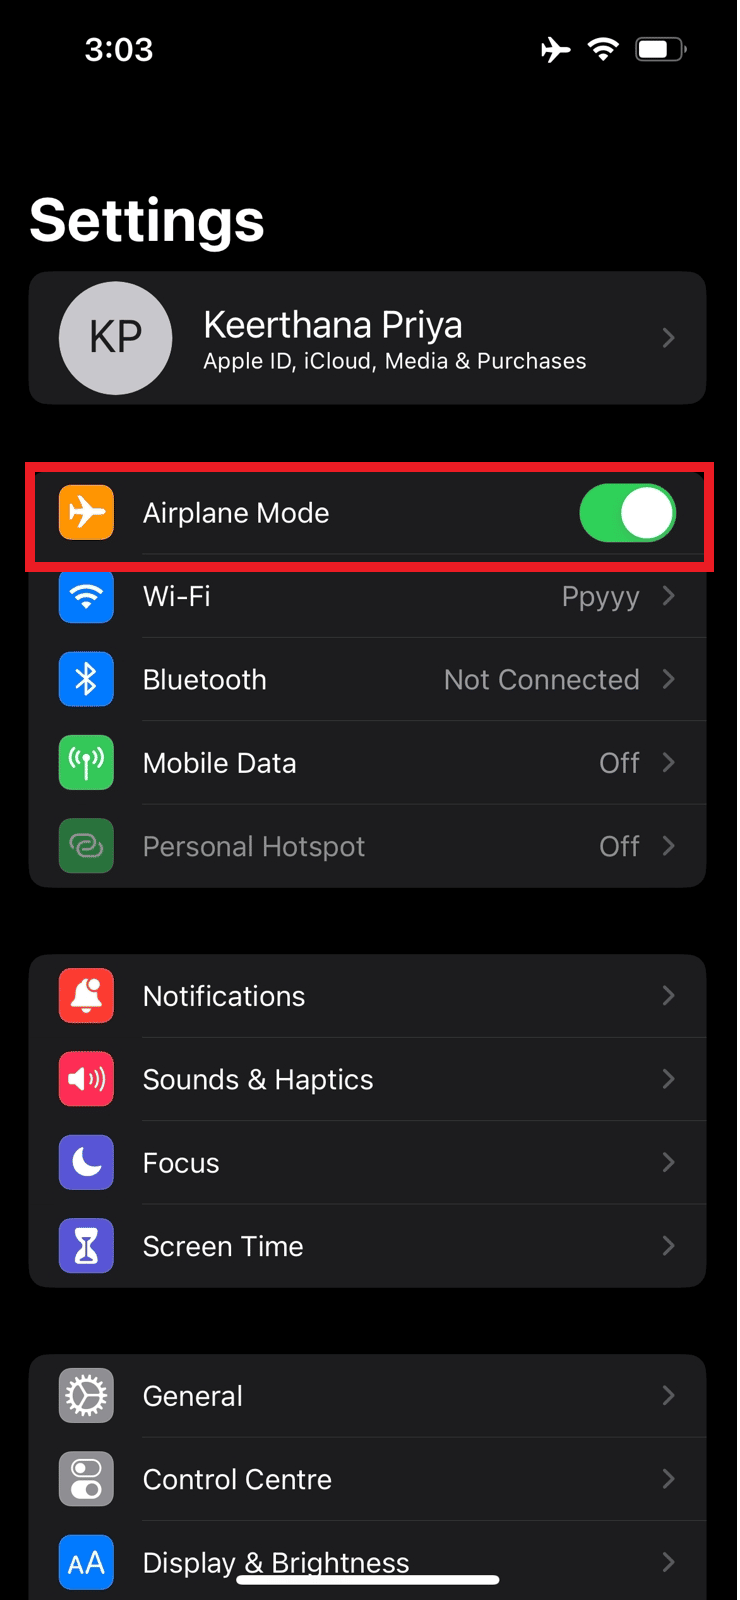 Turn on the Airplane Mode